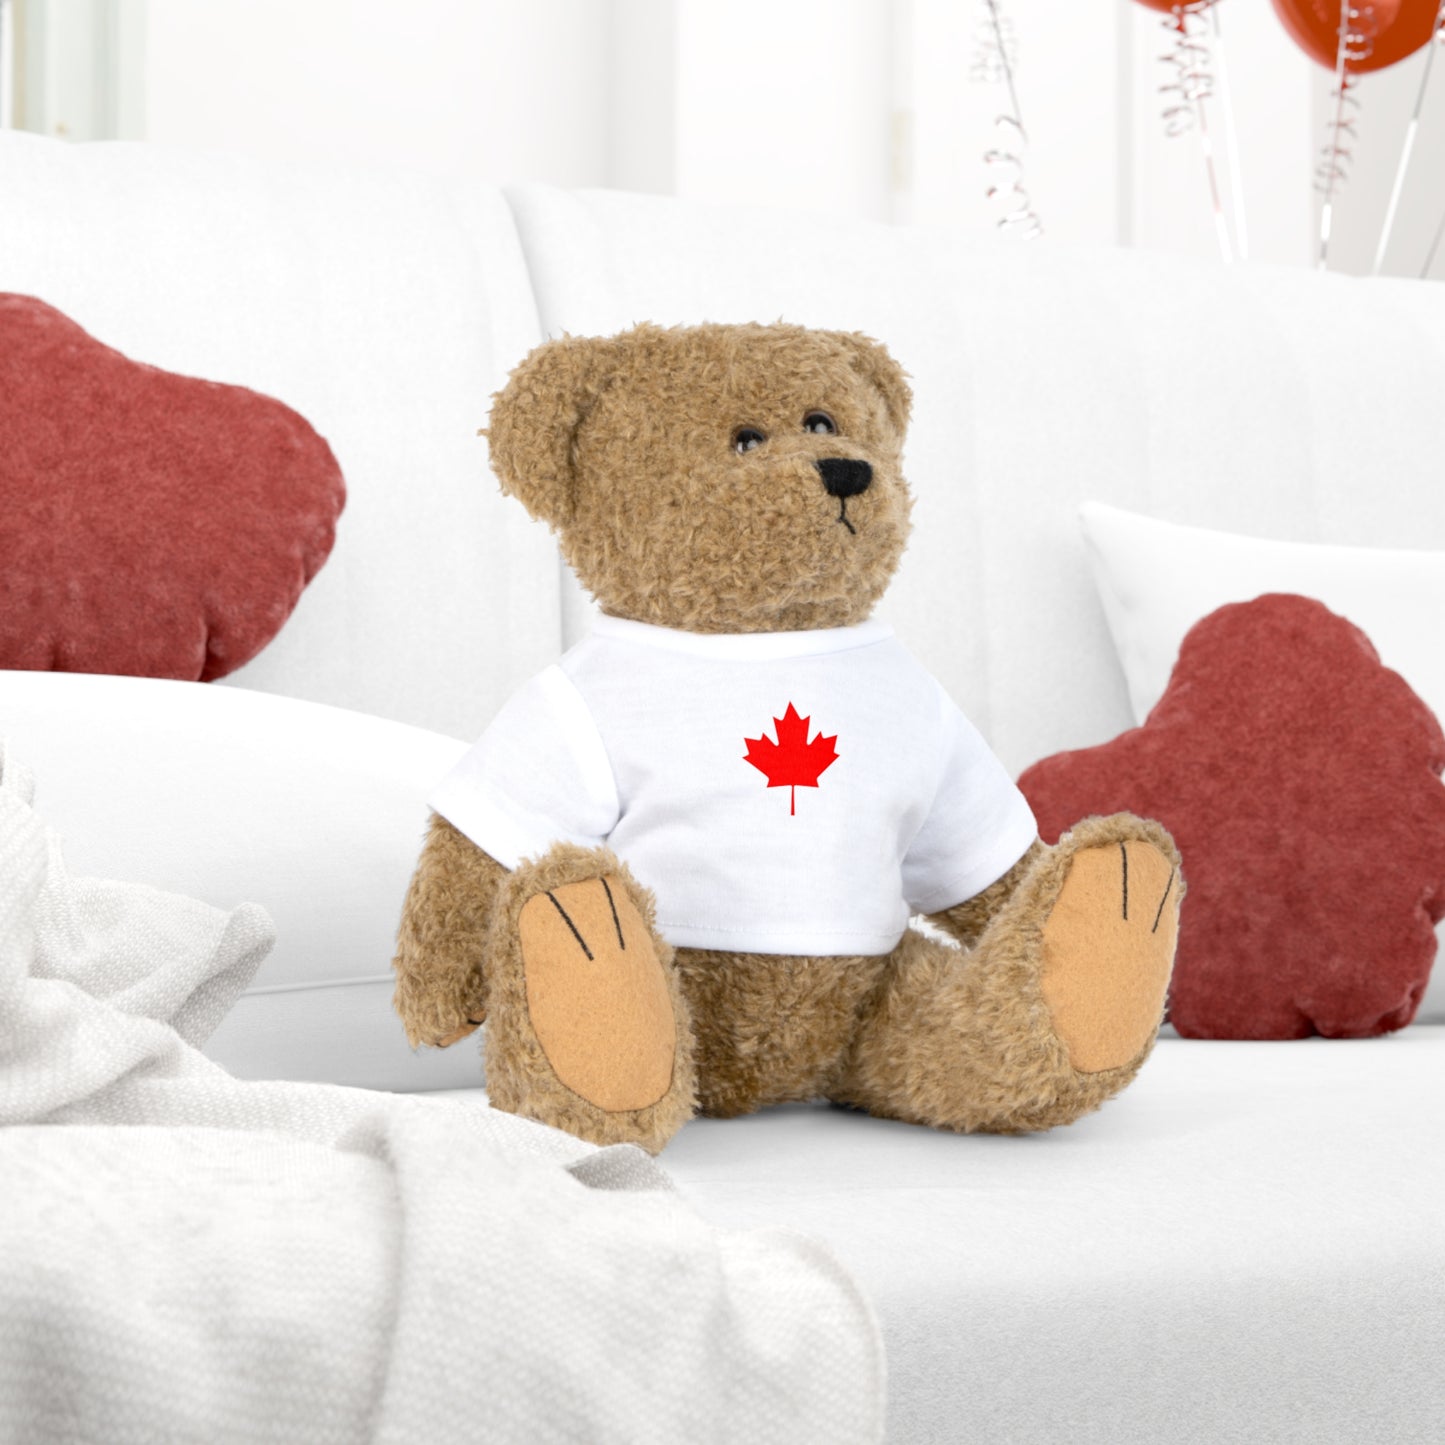 Plush Toy with a Canadian Shirt